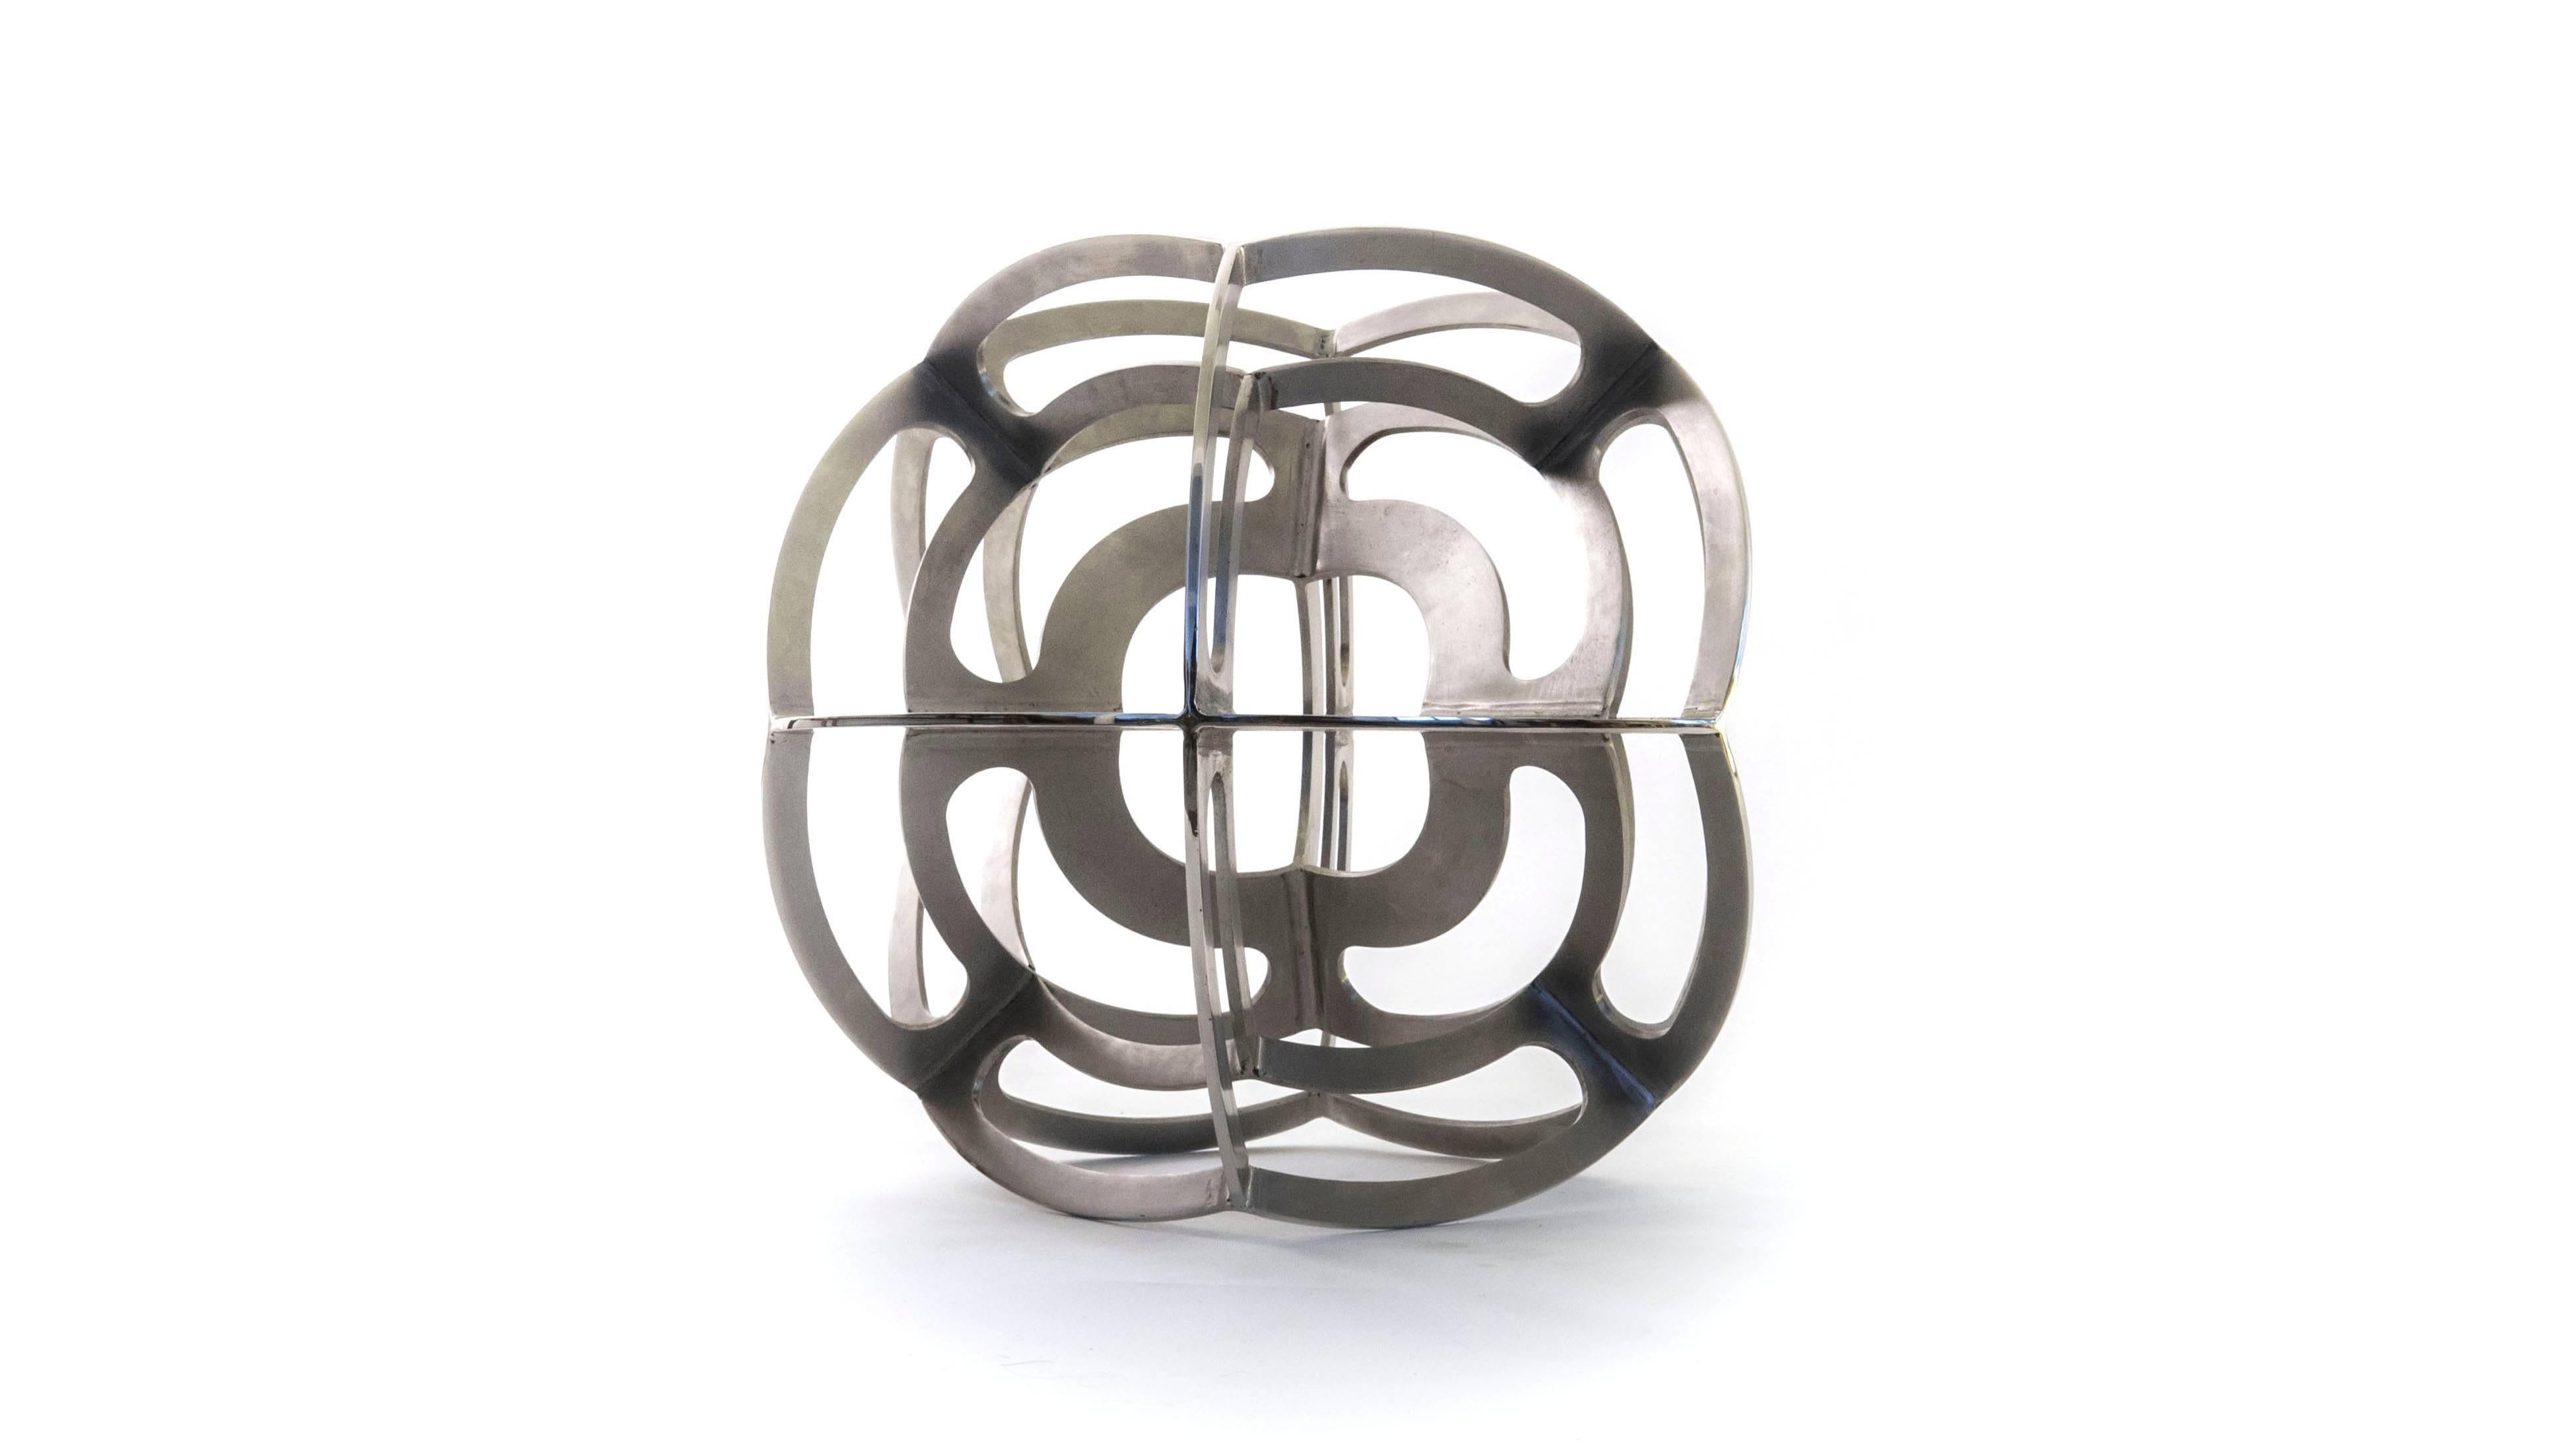 Contemporary Mexican Geometric Dual Tetrahedron Sphere Stainless Steel Sculpture For Sale 1